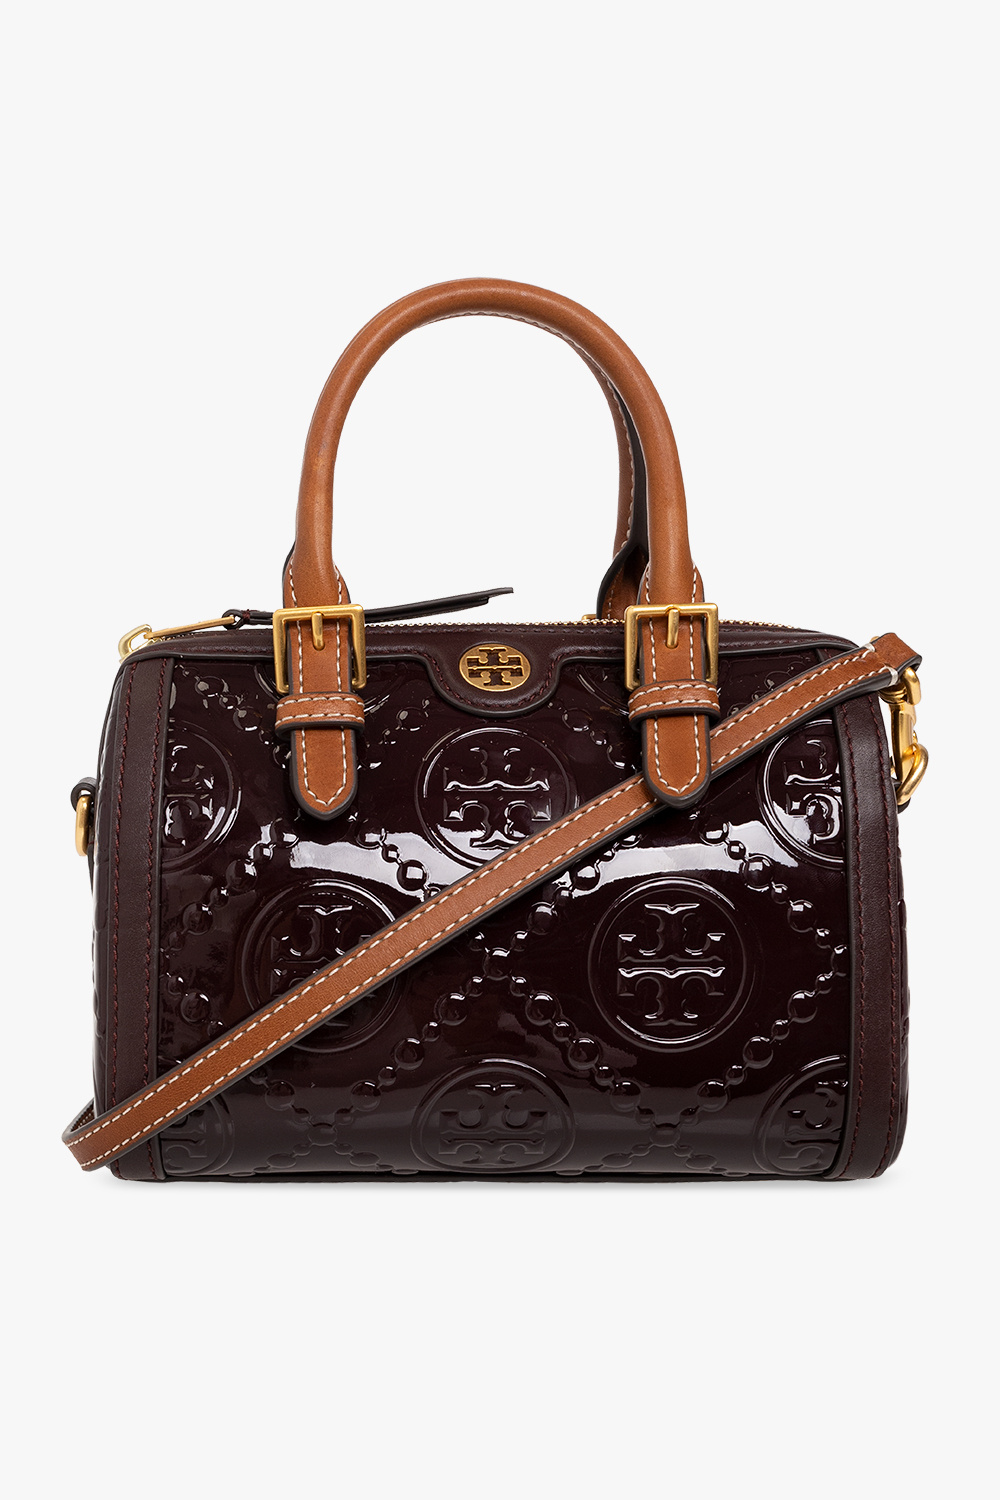 Tory Burch Shoulder bag in patent leather, Women's Bags